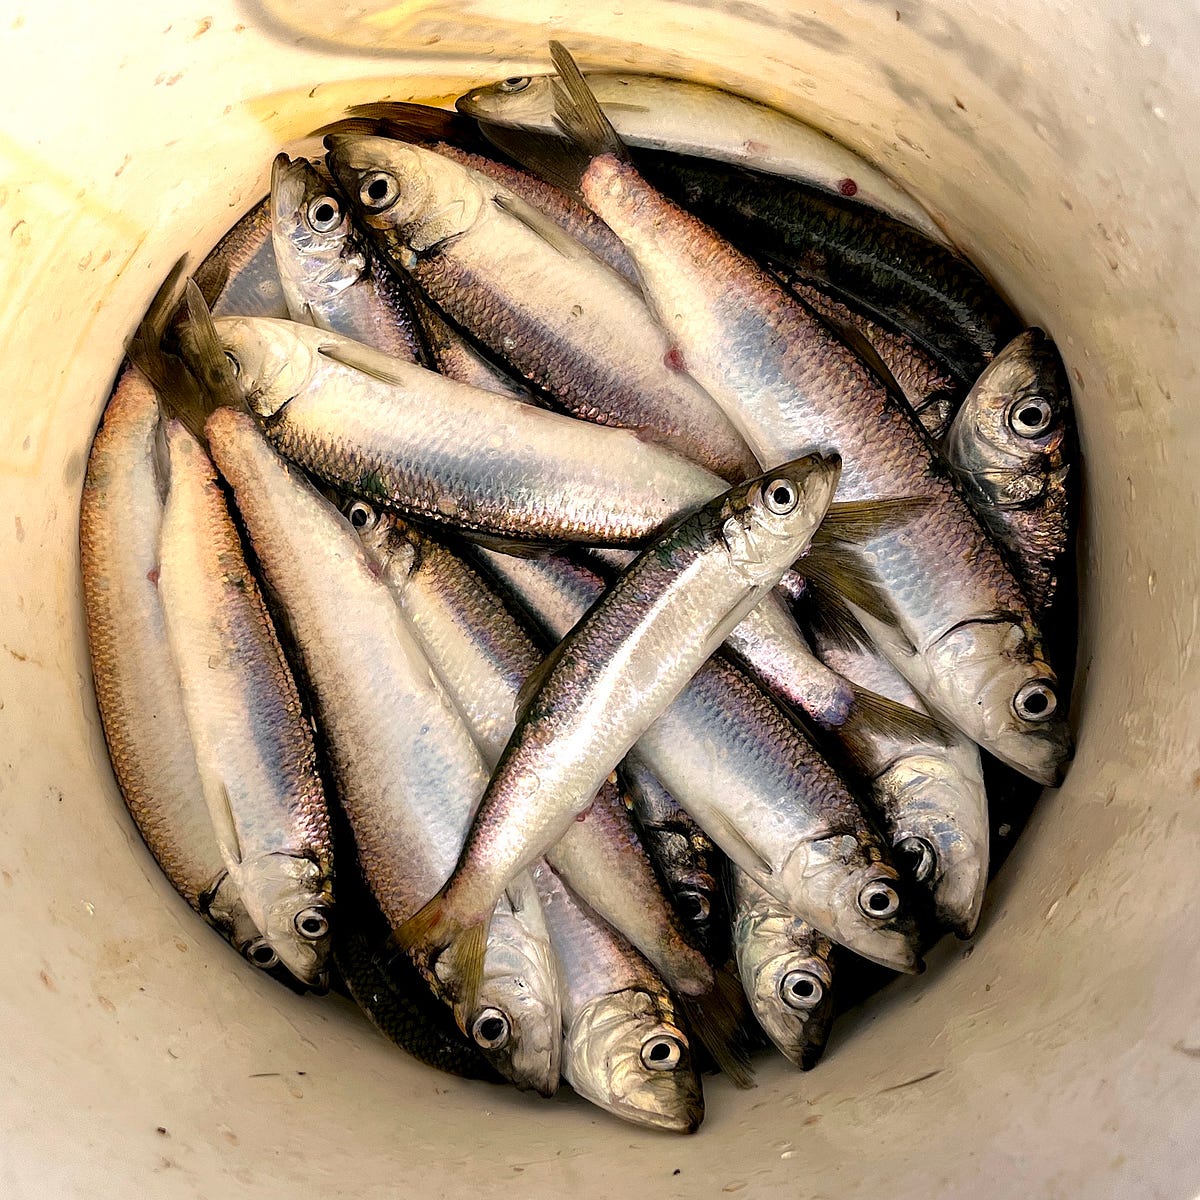 On Your Mark, Get Set, Spawn! The Annual SF Bay Herring Run Is About to  Begin, by Kristi Coale